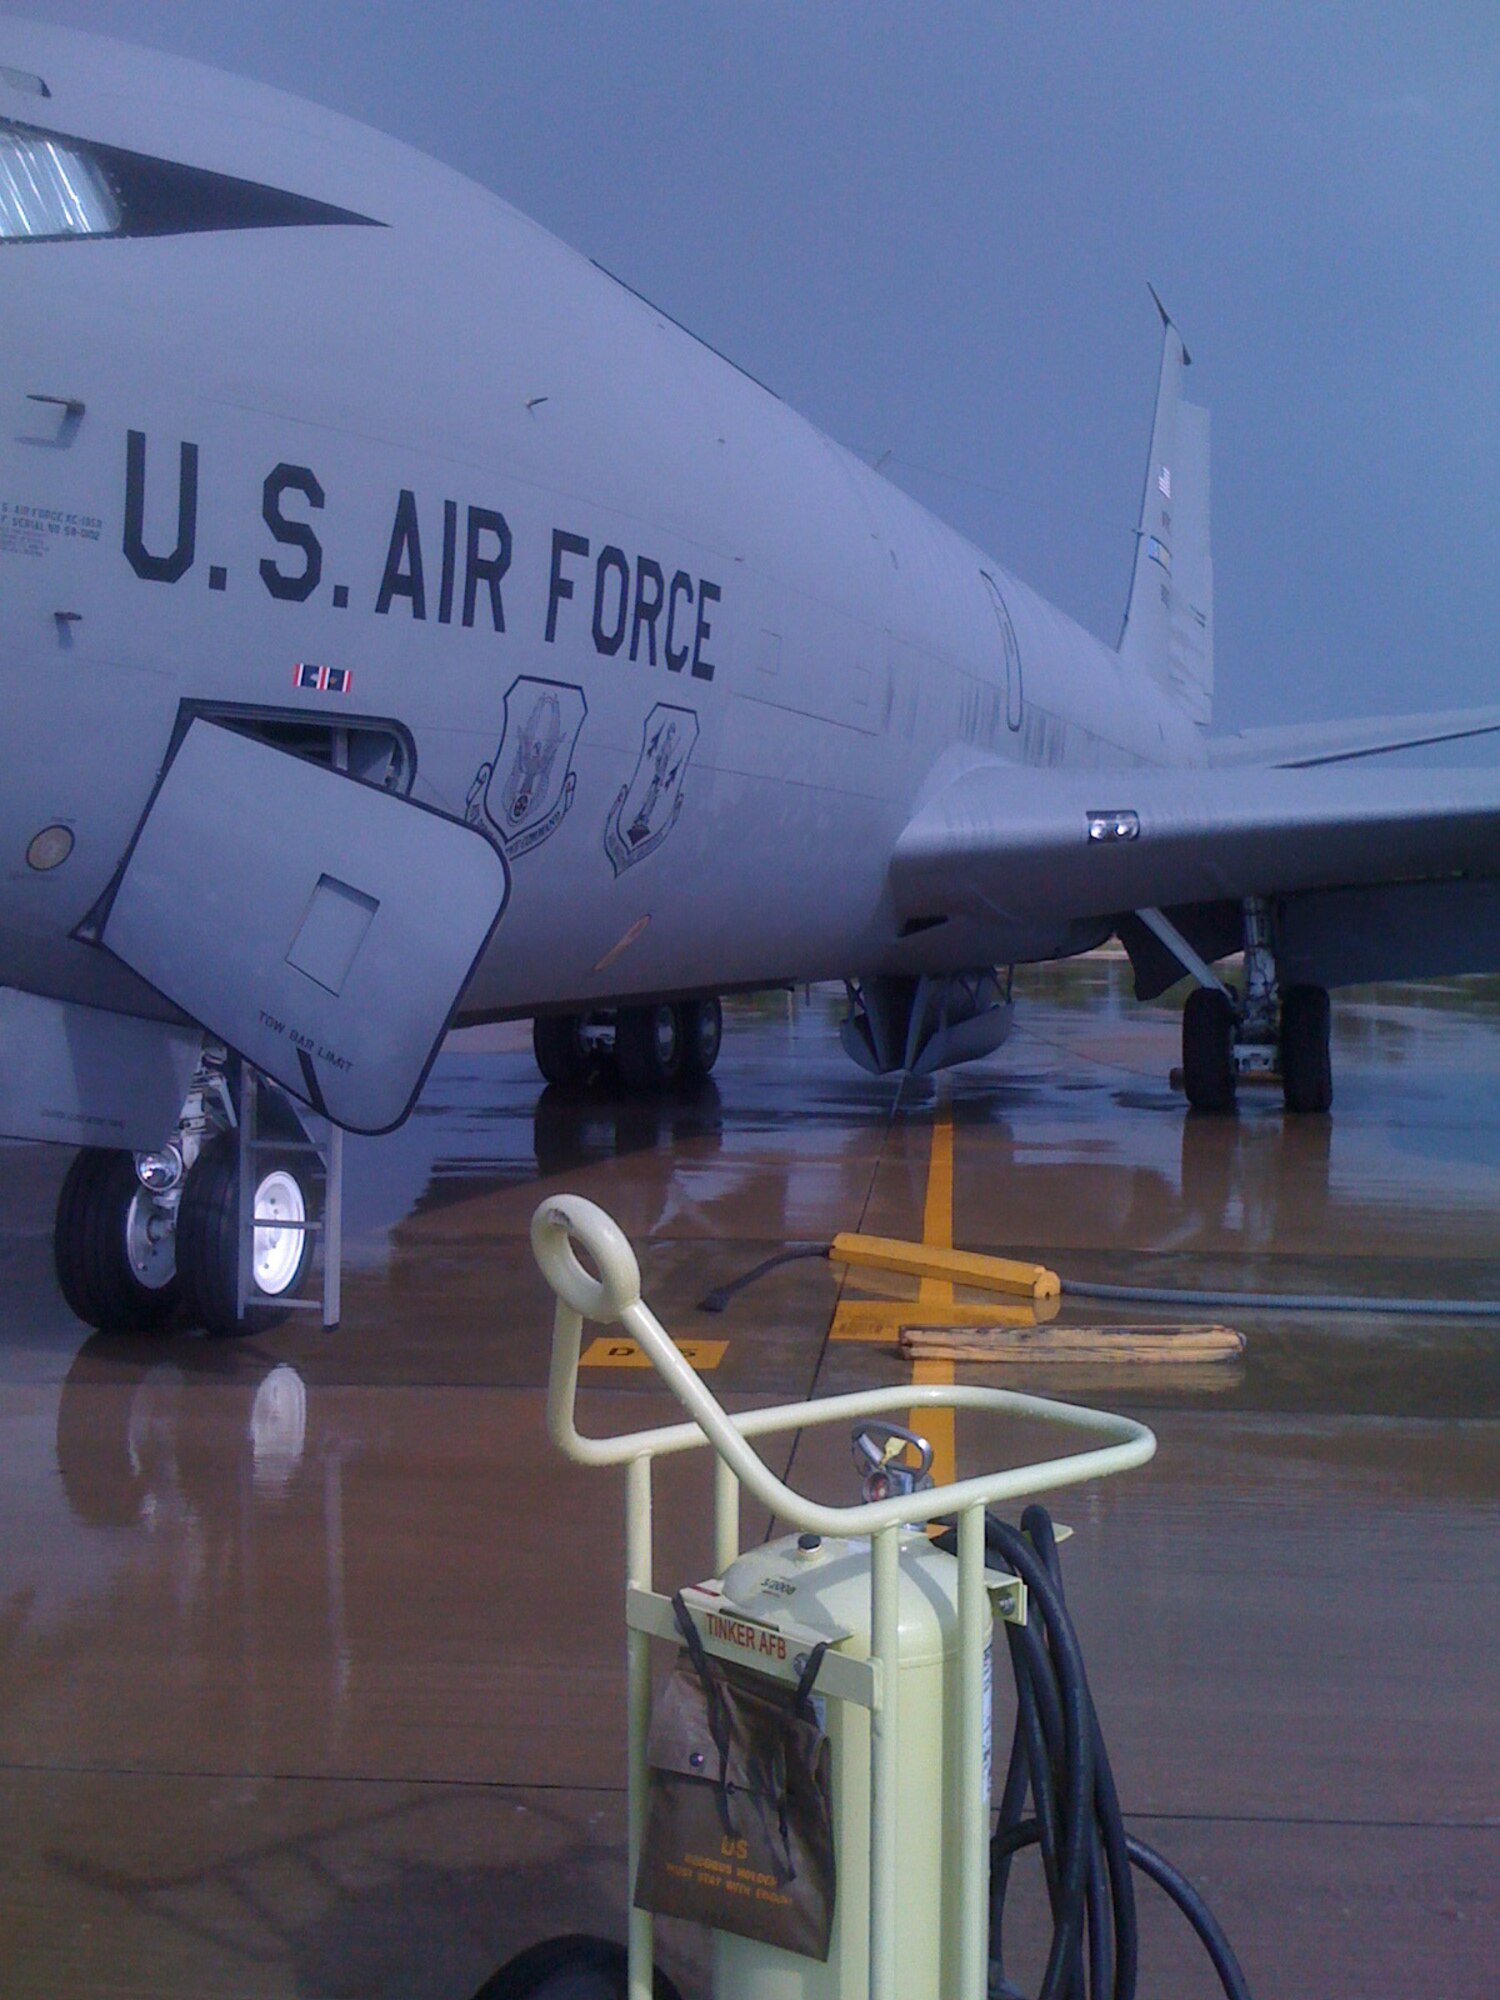 High winds struck Tinker Air Force Base July 16 and moved several 507th ARW KC-135 aircraft parked on the ramp. The fueled aircraft weighed approximately 175 to 180,000 pounds.  In this picture you can see the nose gear slid several feet to the side of the yellow center line during the storm's estimated 74 mph winds.  